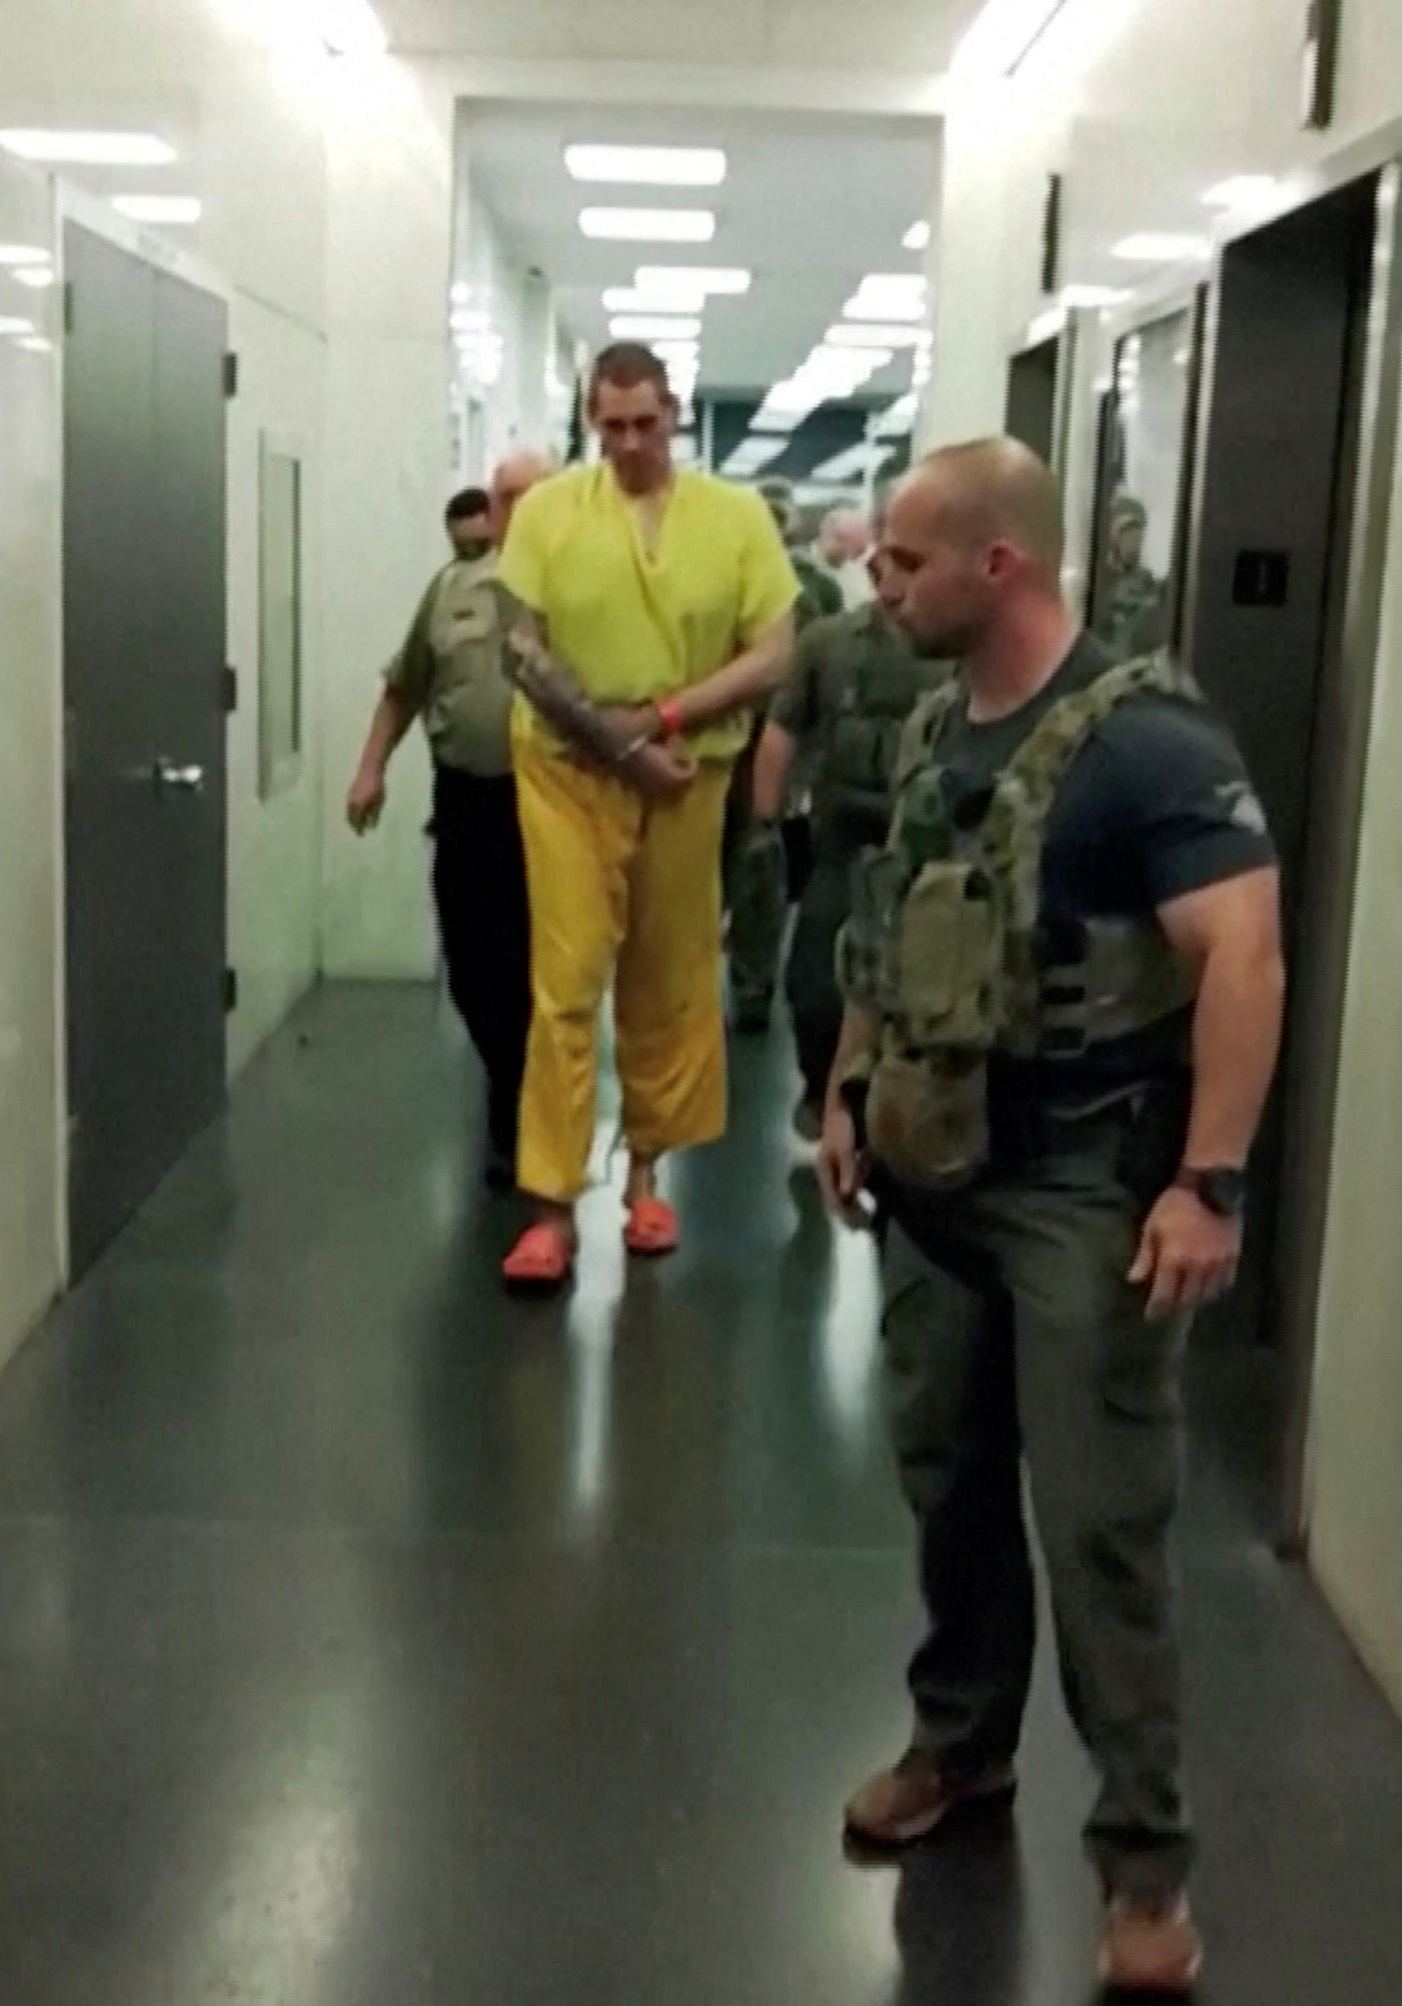 Newly leaked Florence prison video shows inmates trap officers